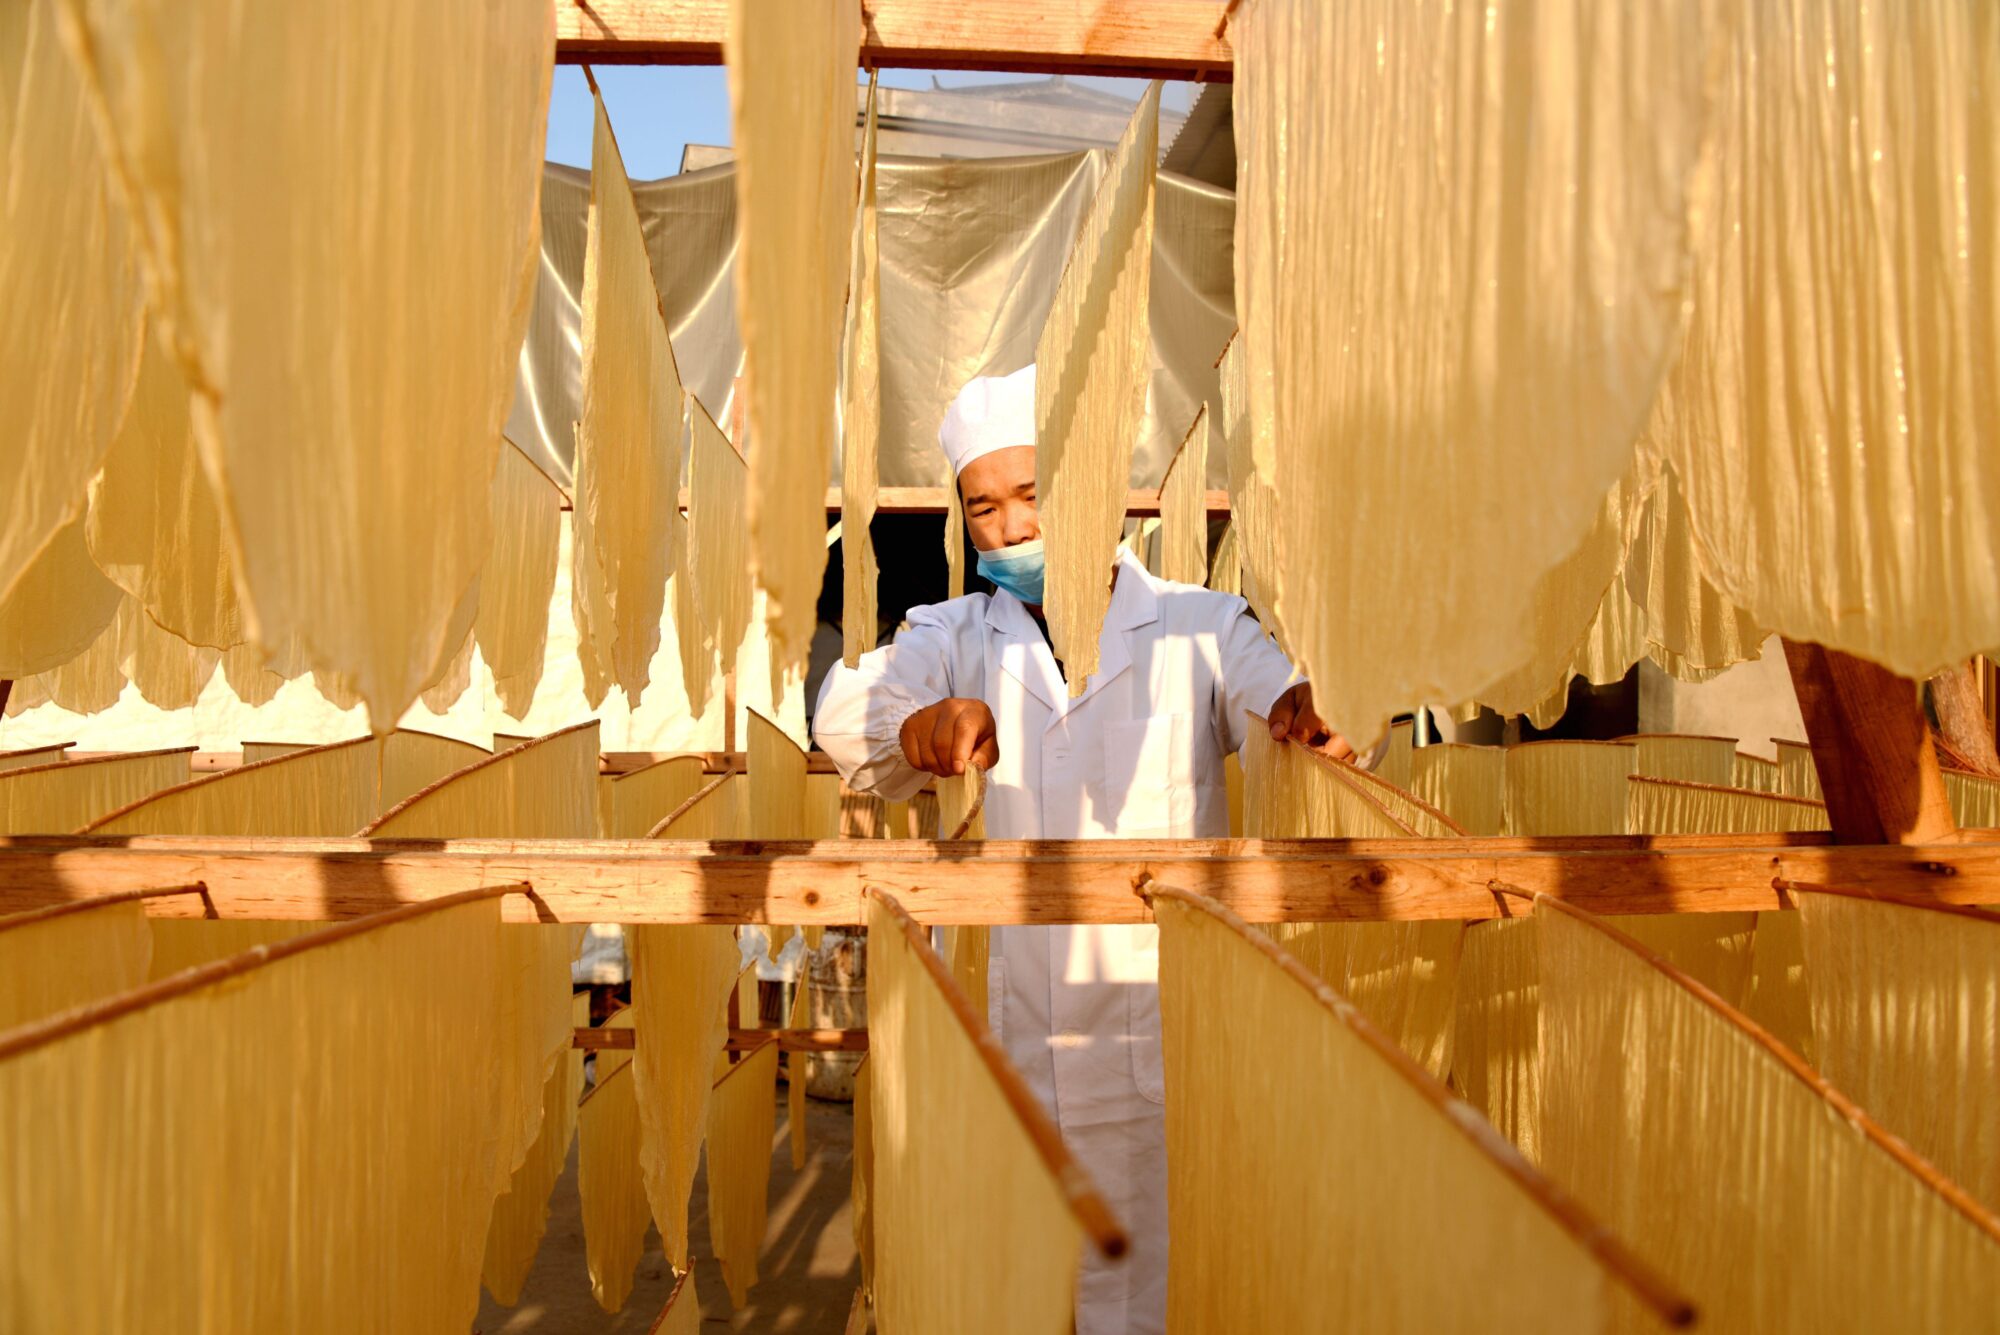 A person dries tofu skin on a drying shack